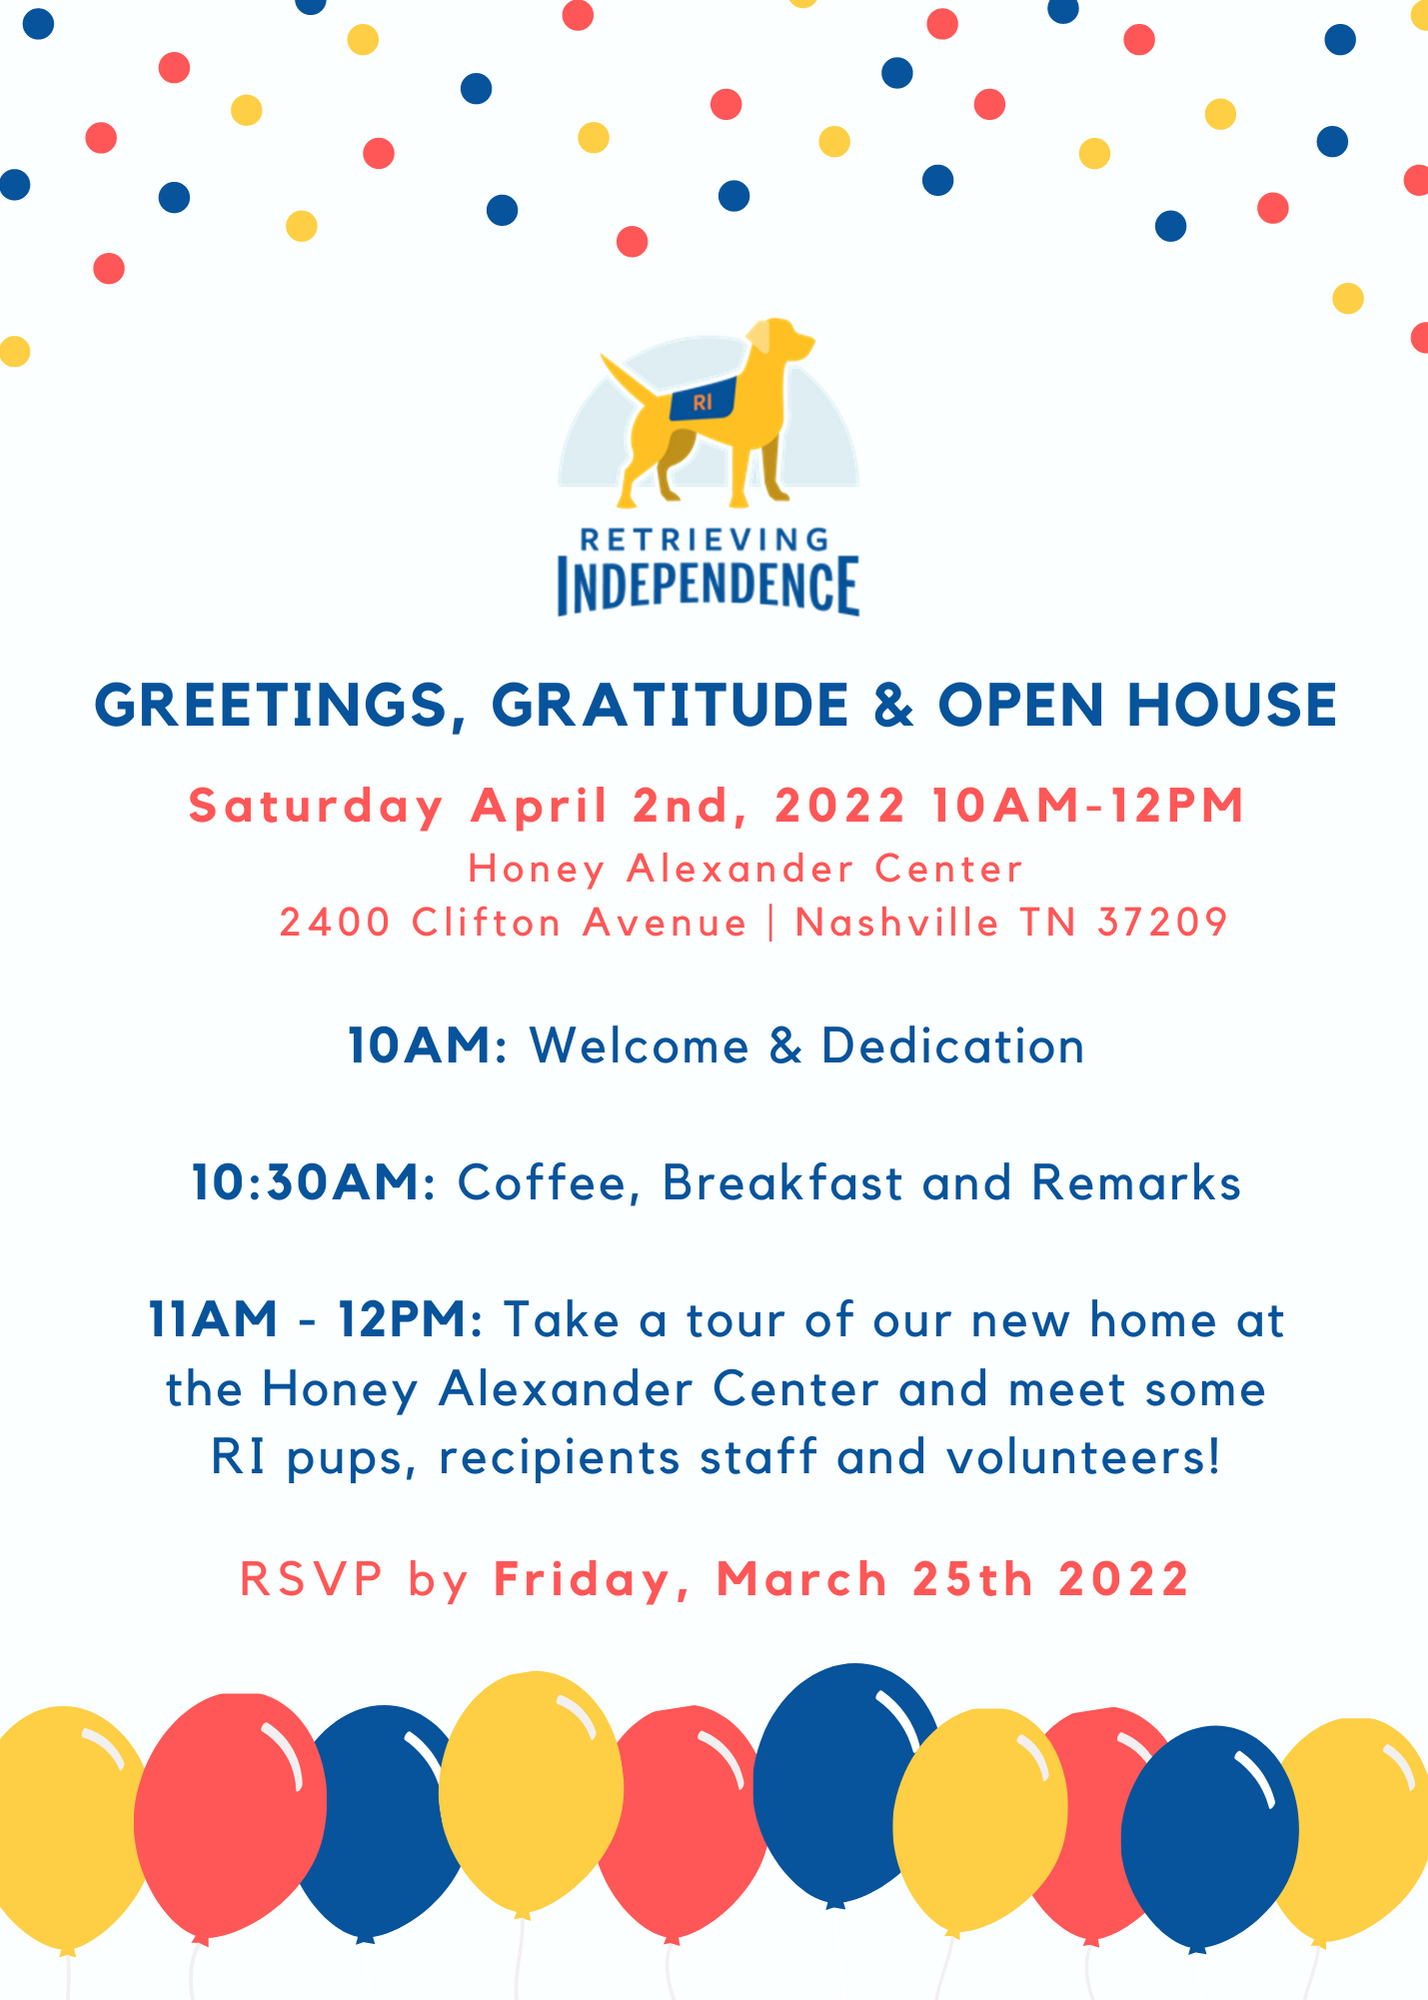 Join us Saturday, April 2nd for RI’s Greetings, Gratitude & Open House